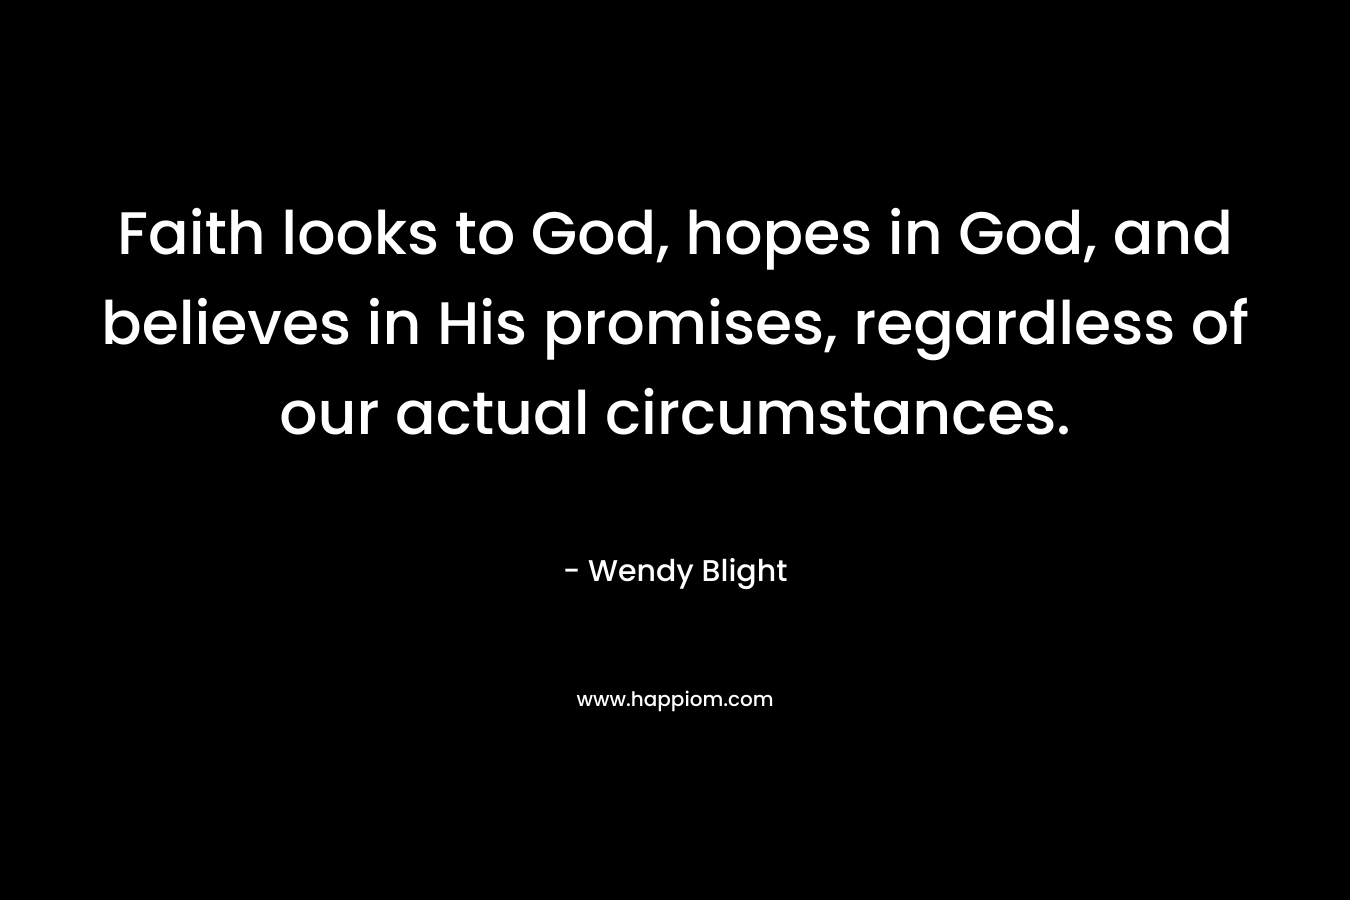 Faith looks to God, hopes in God, and believes in His promises, regardless of our actual circumstances.